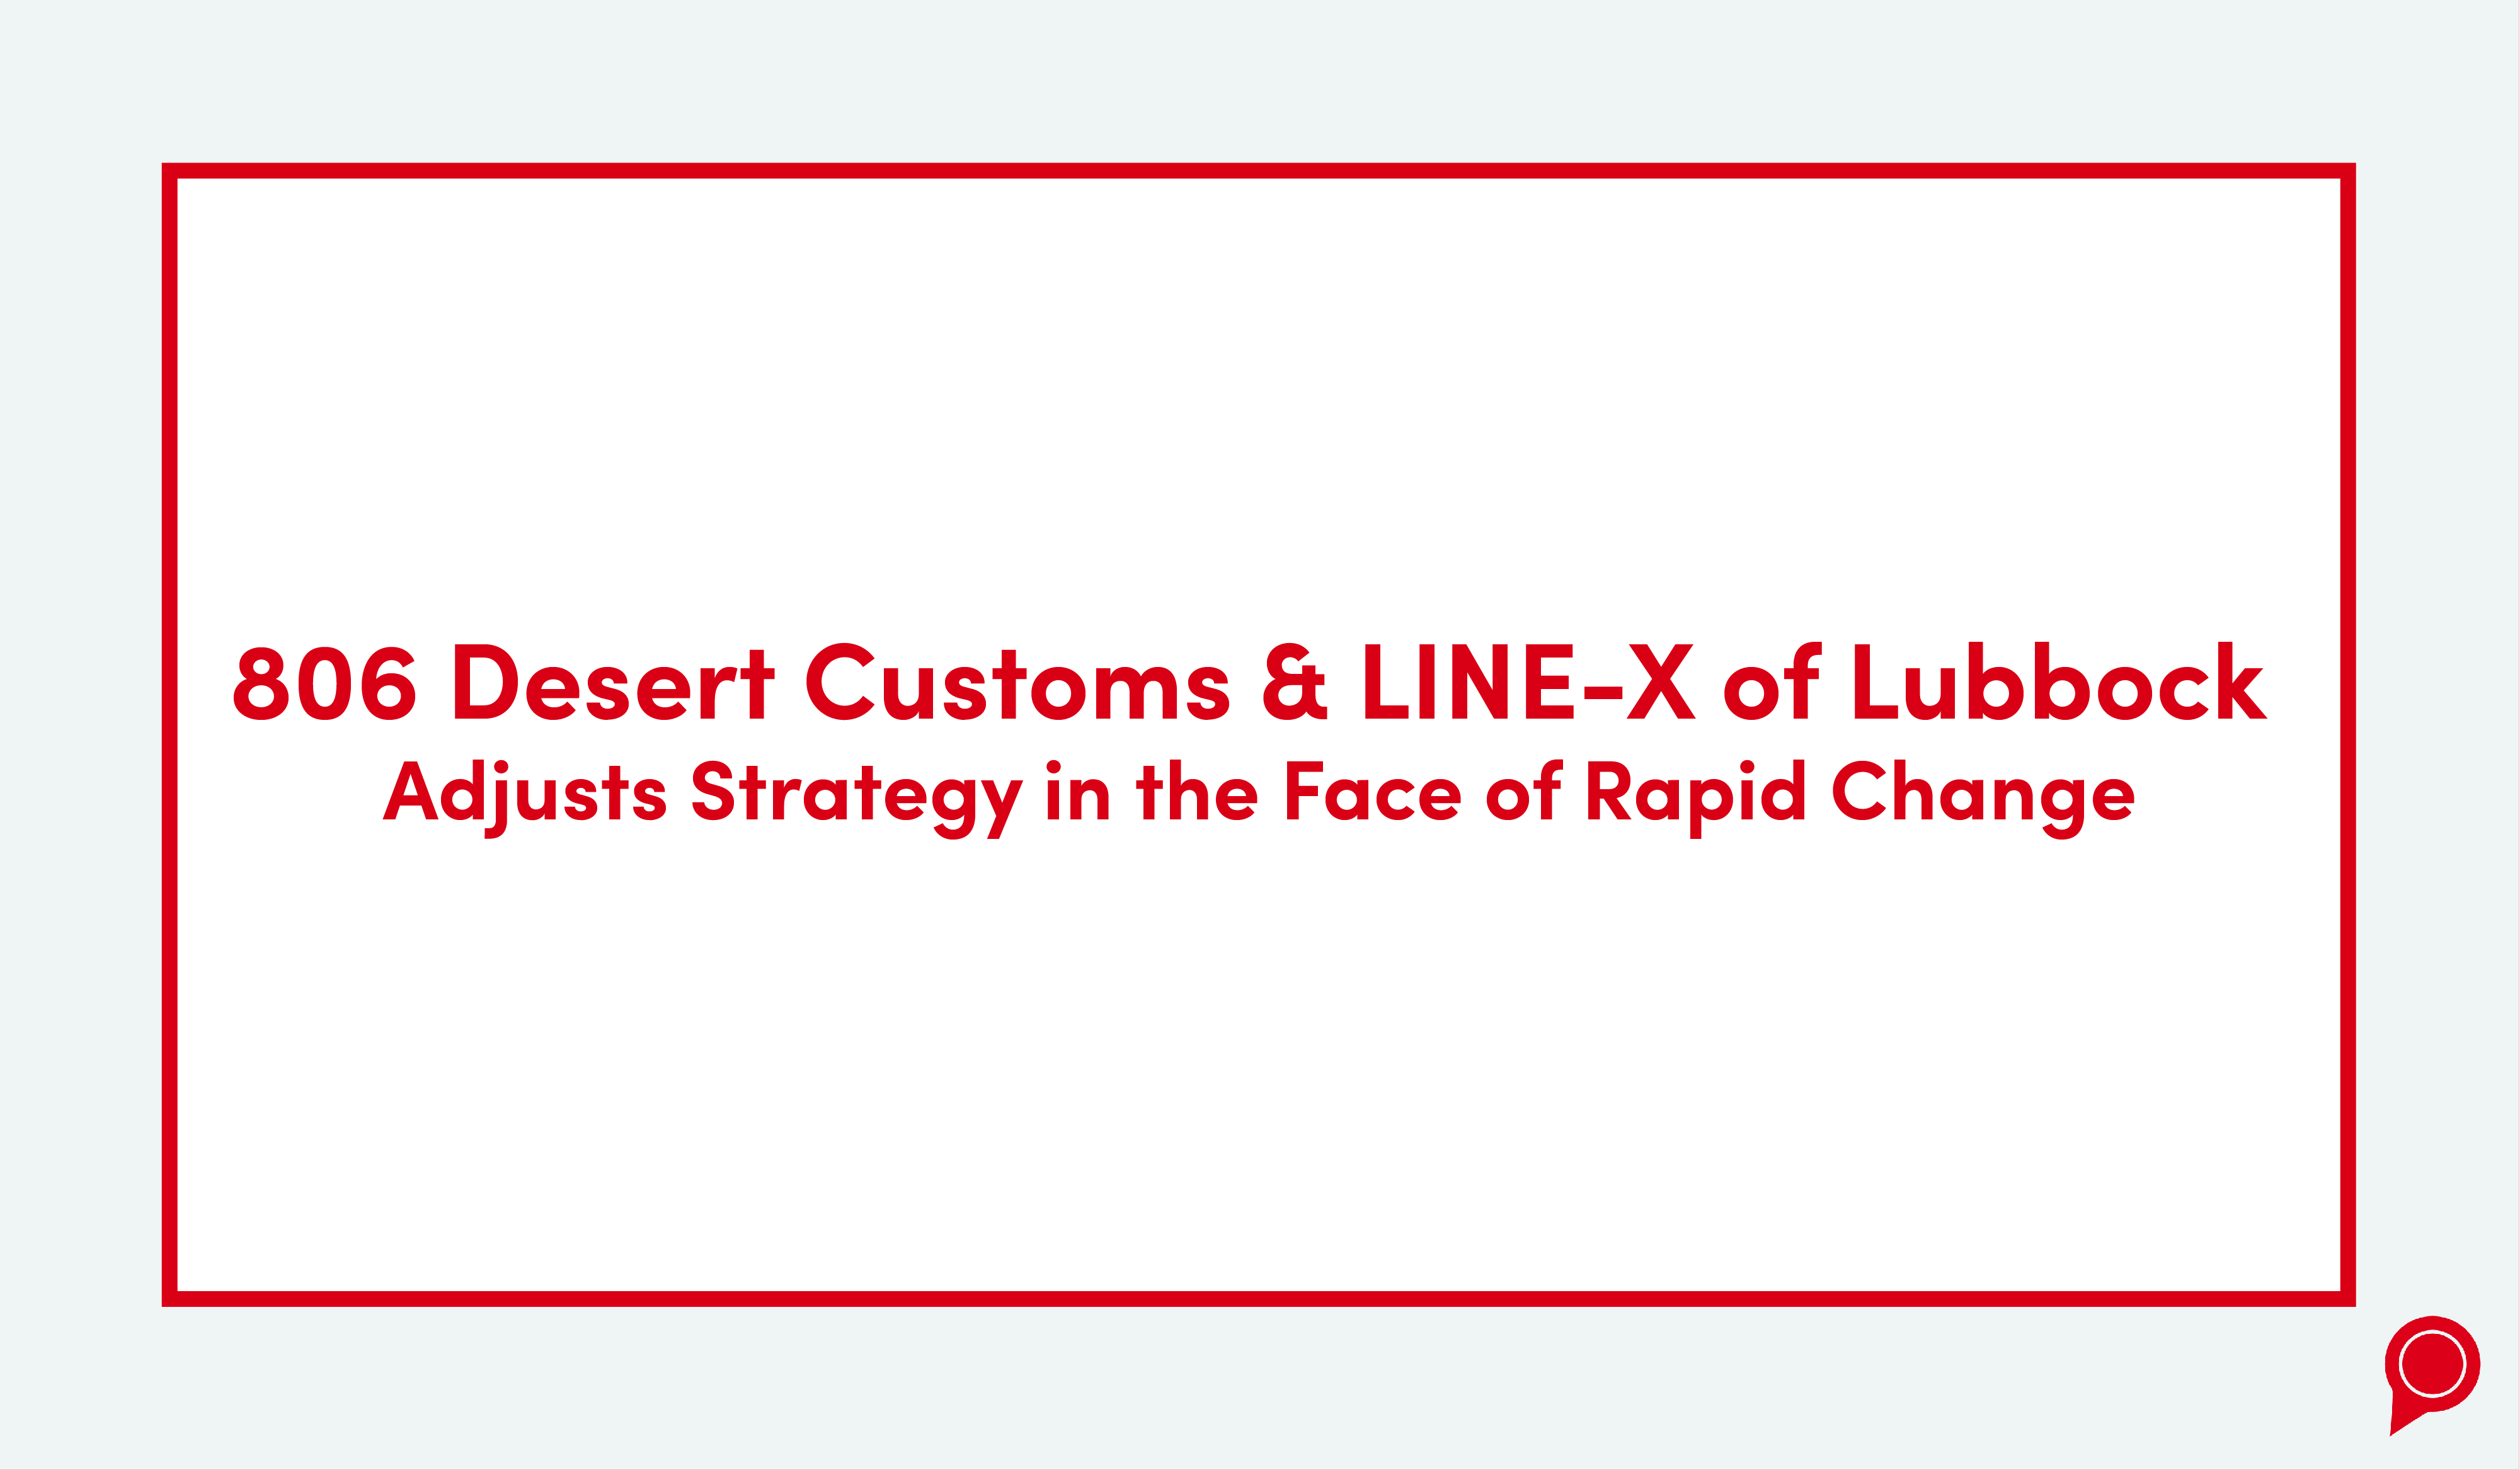 806 Desert Customs & Line-X of Lubbock adjusts strategy in the face of rapid change